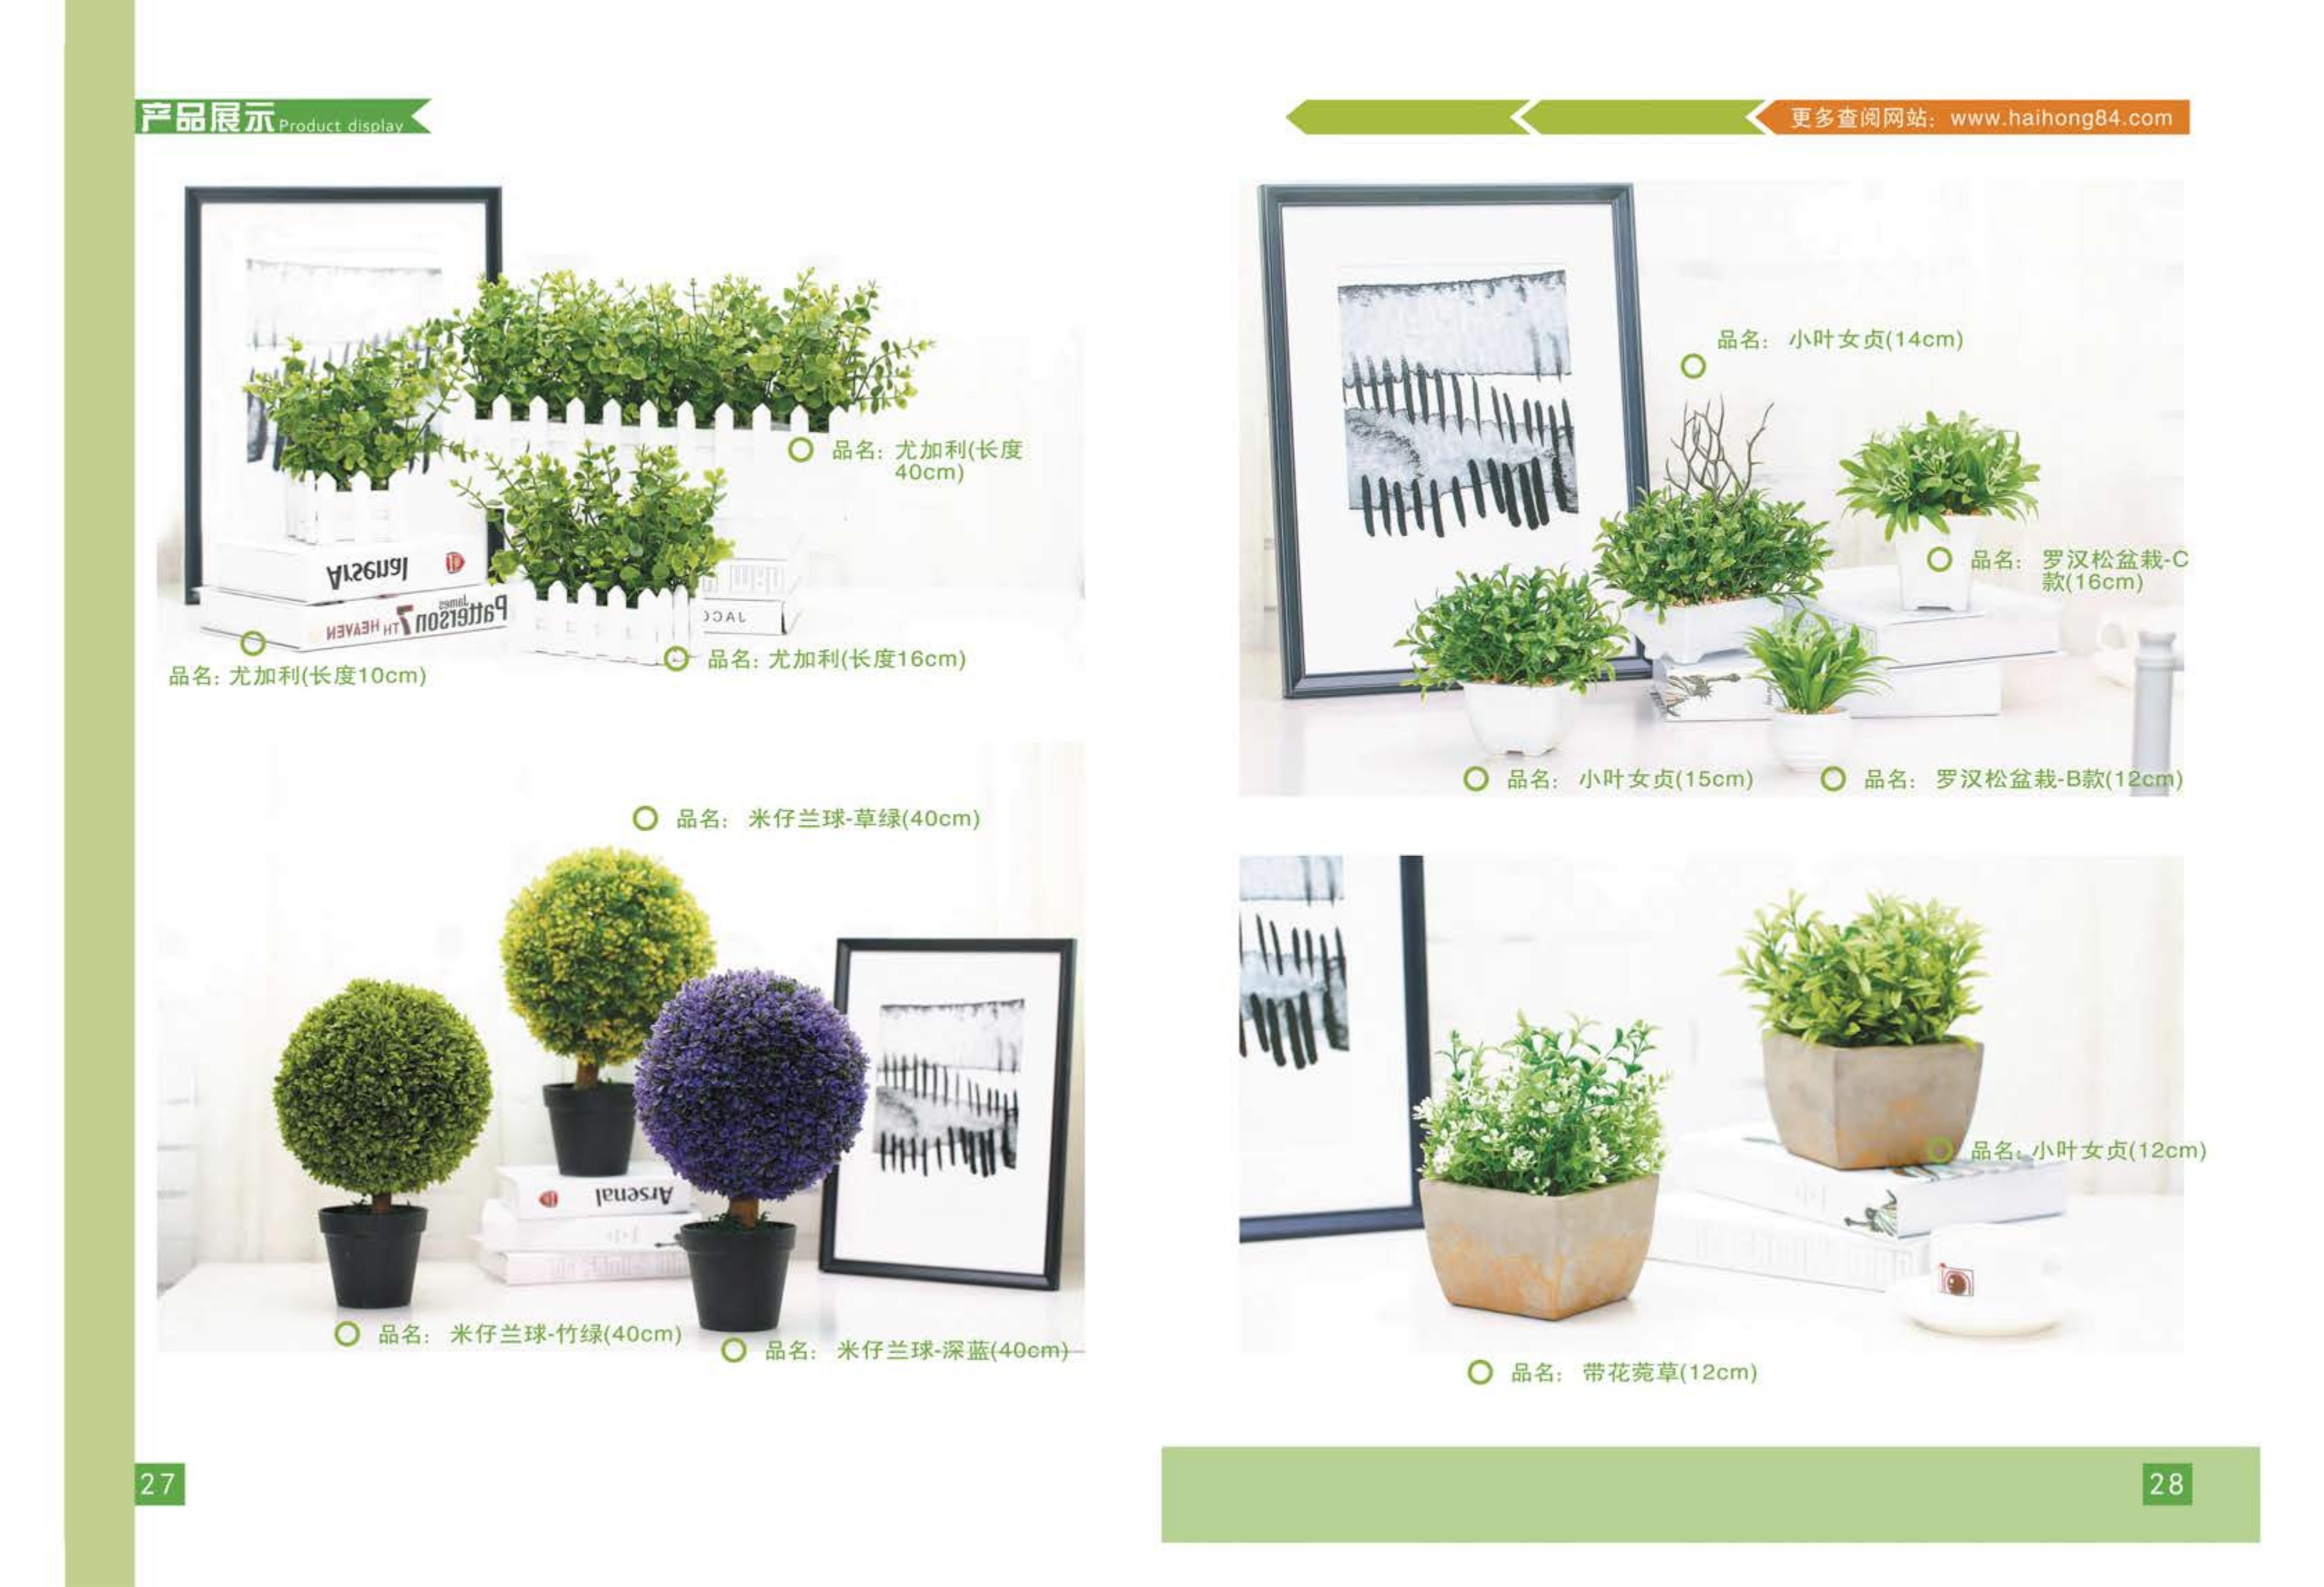 Soft decoration household artificial plant products